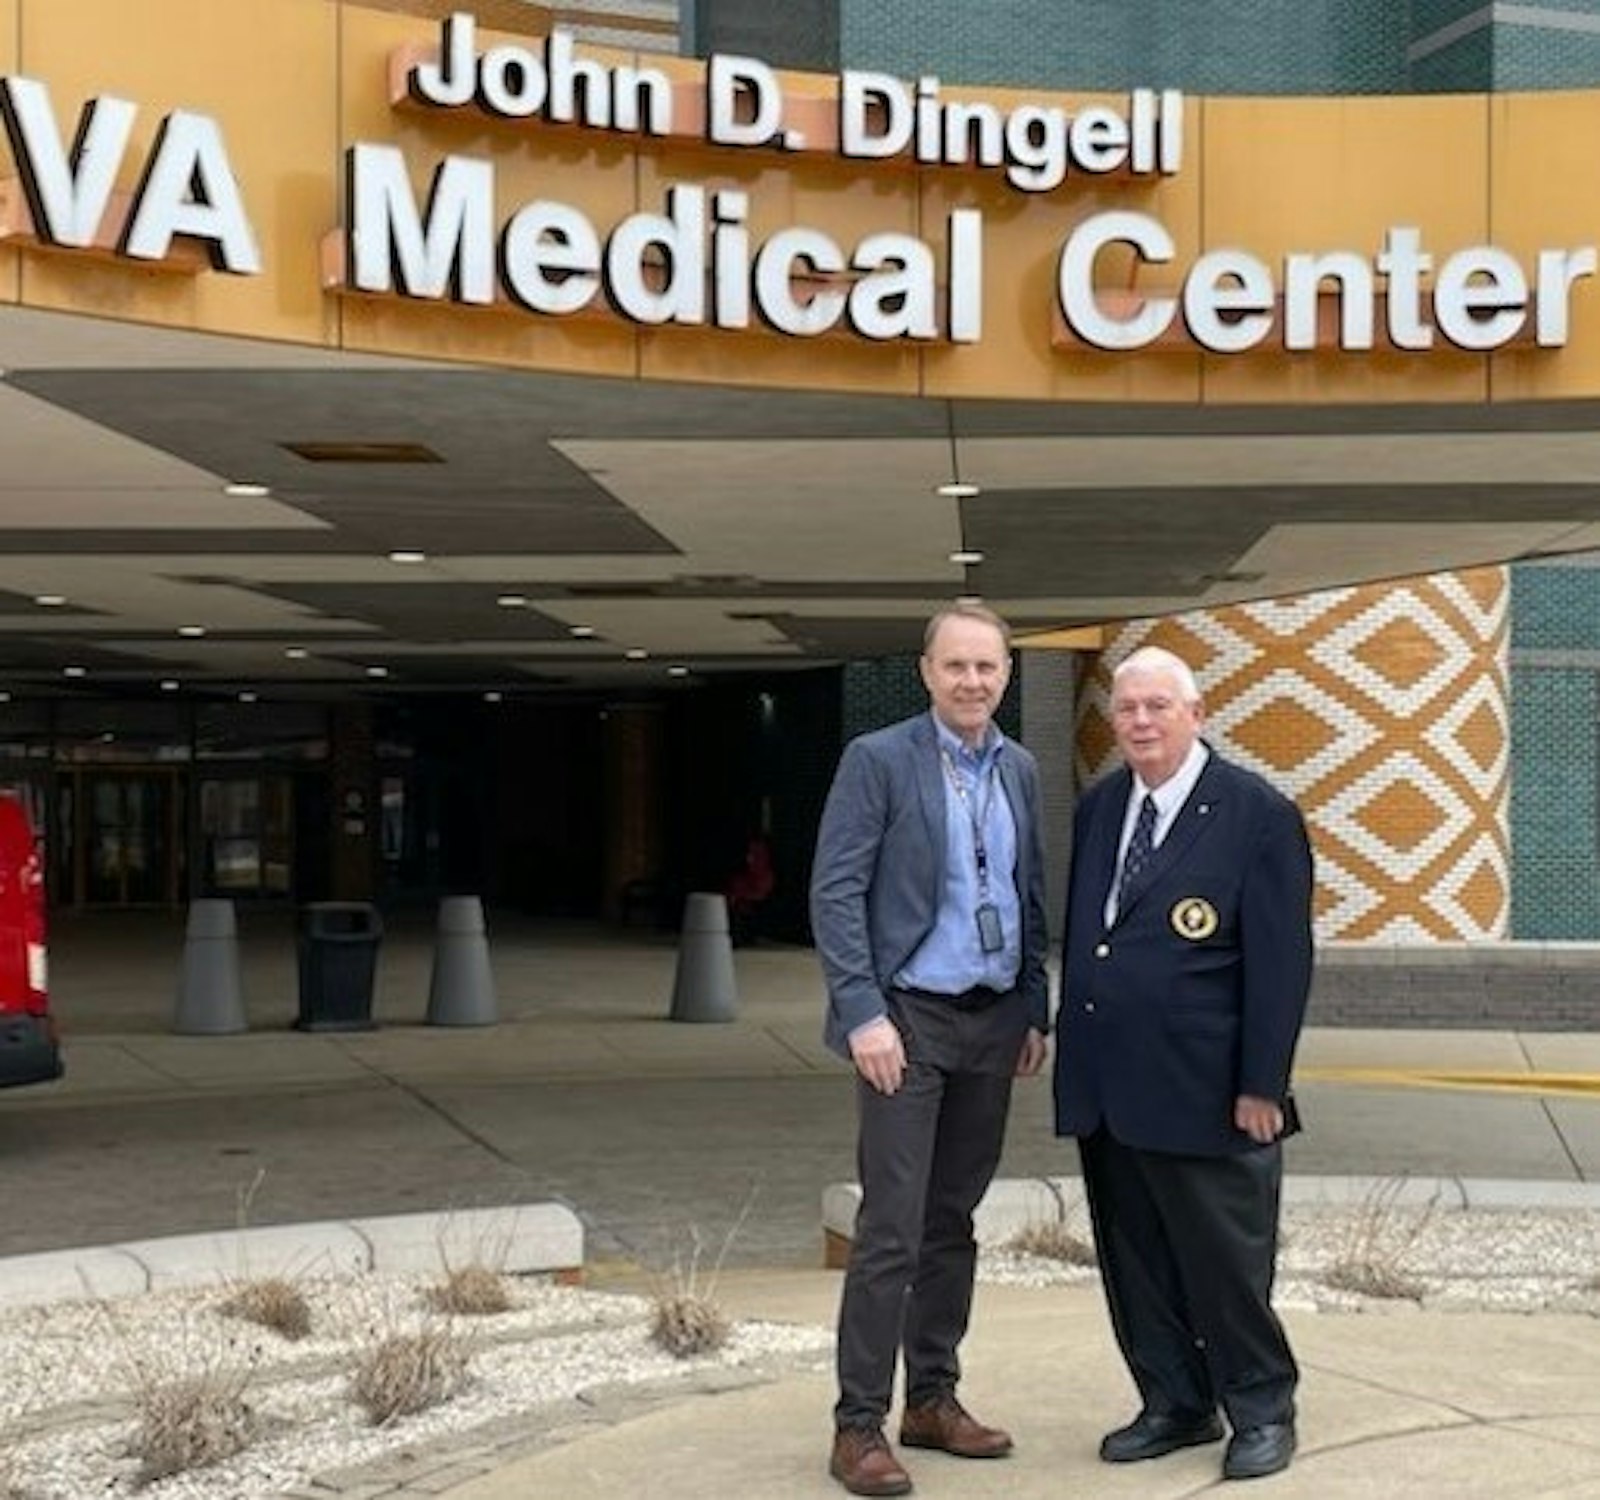 Larry Sulikowski, right, stands with William R. Browning, director of volunteer and community relations for the Veterans Administration, outside the main entrance of the John D. Dingell VA Medical Center in Detroit. (Courtesy photo)